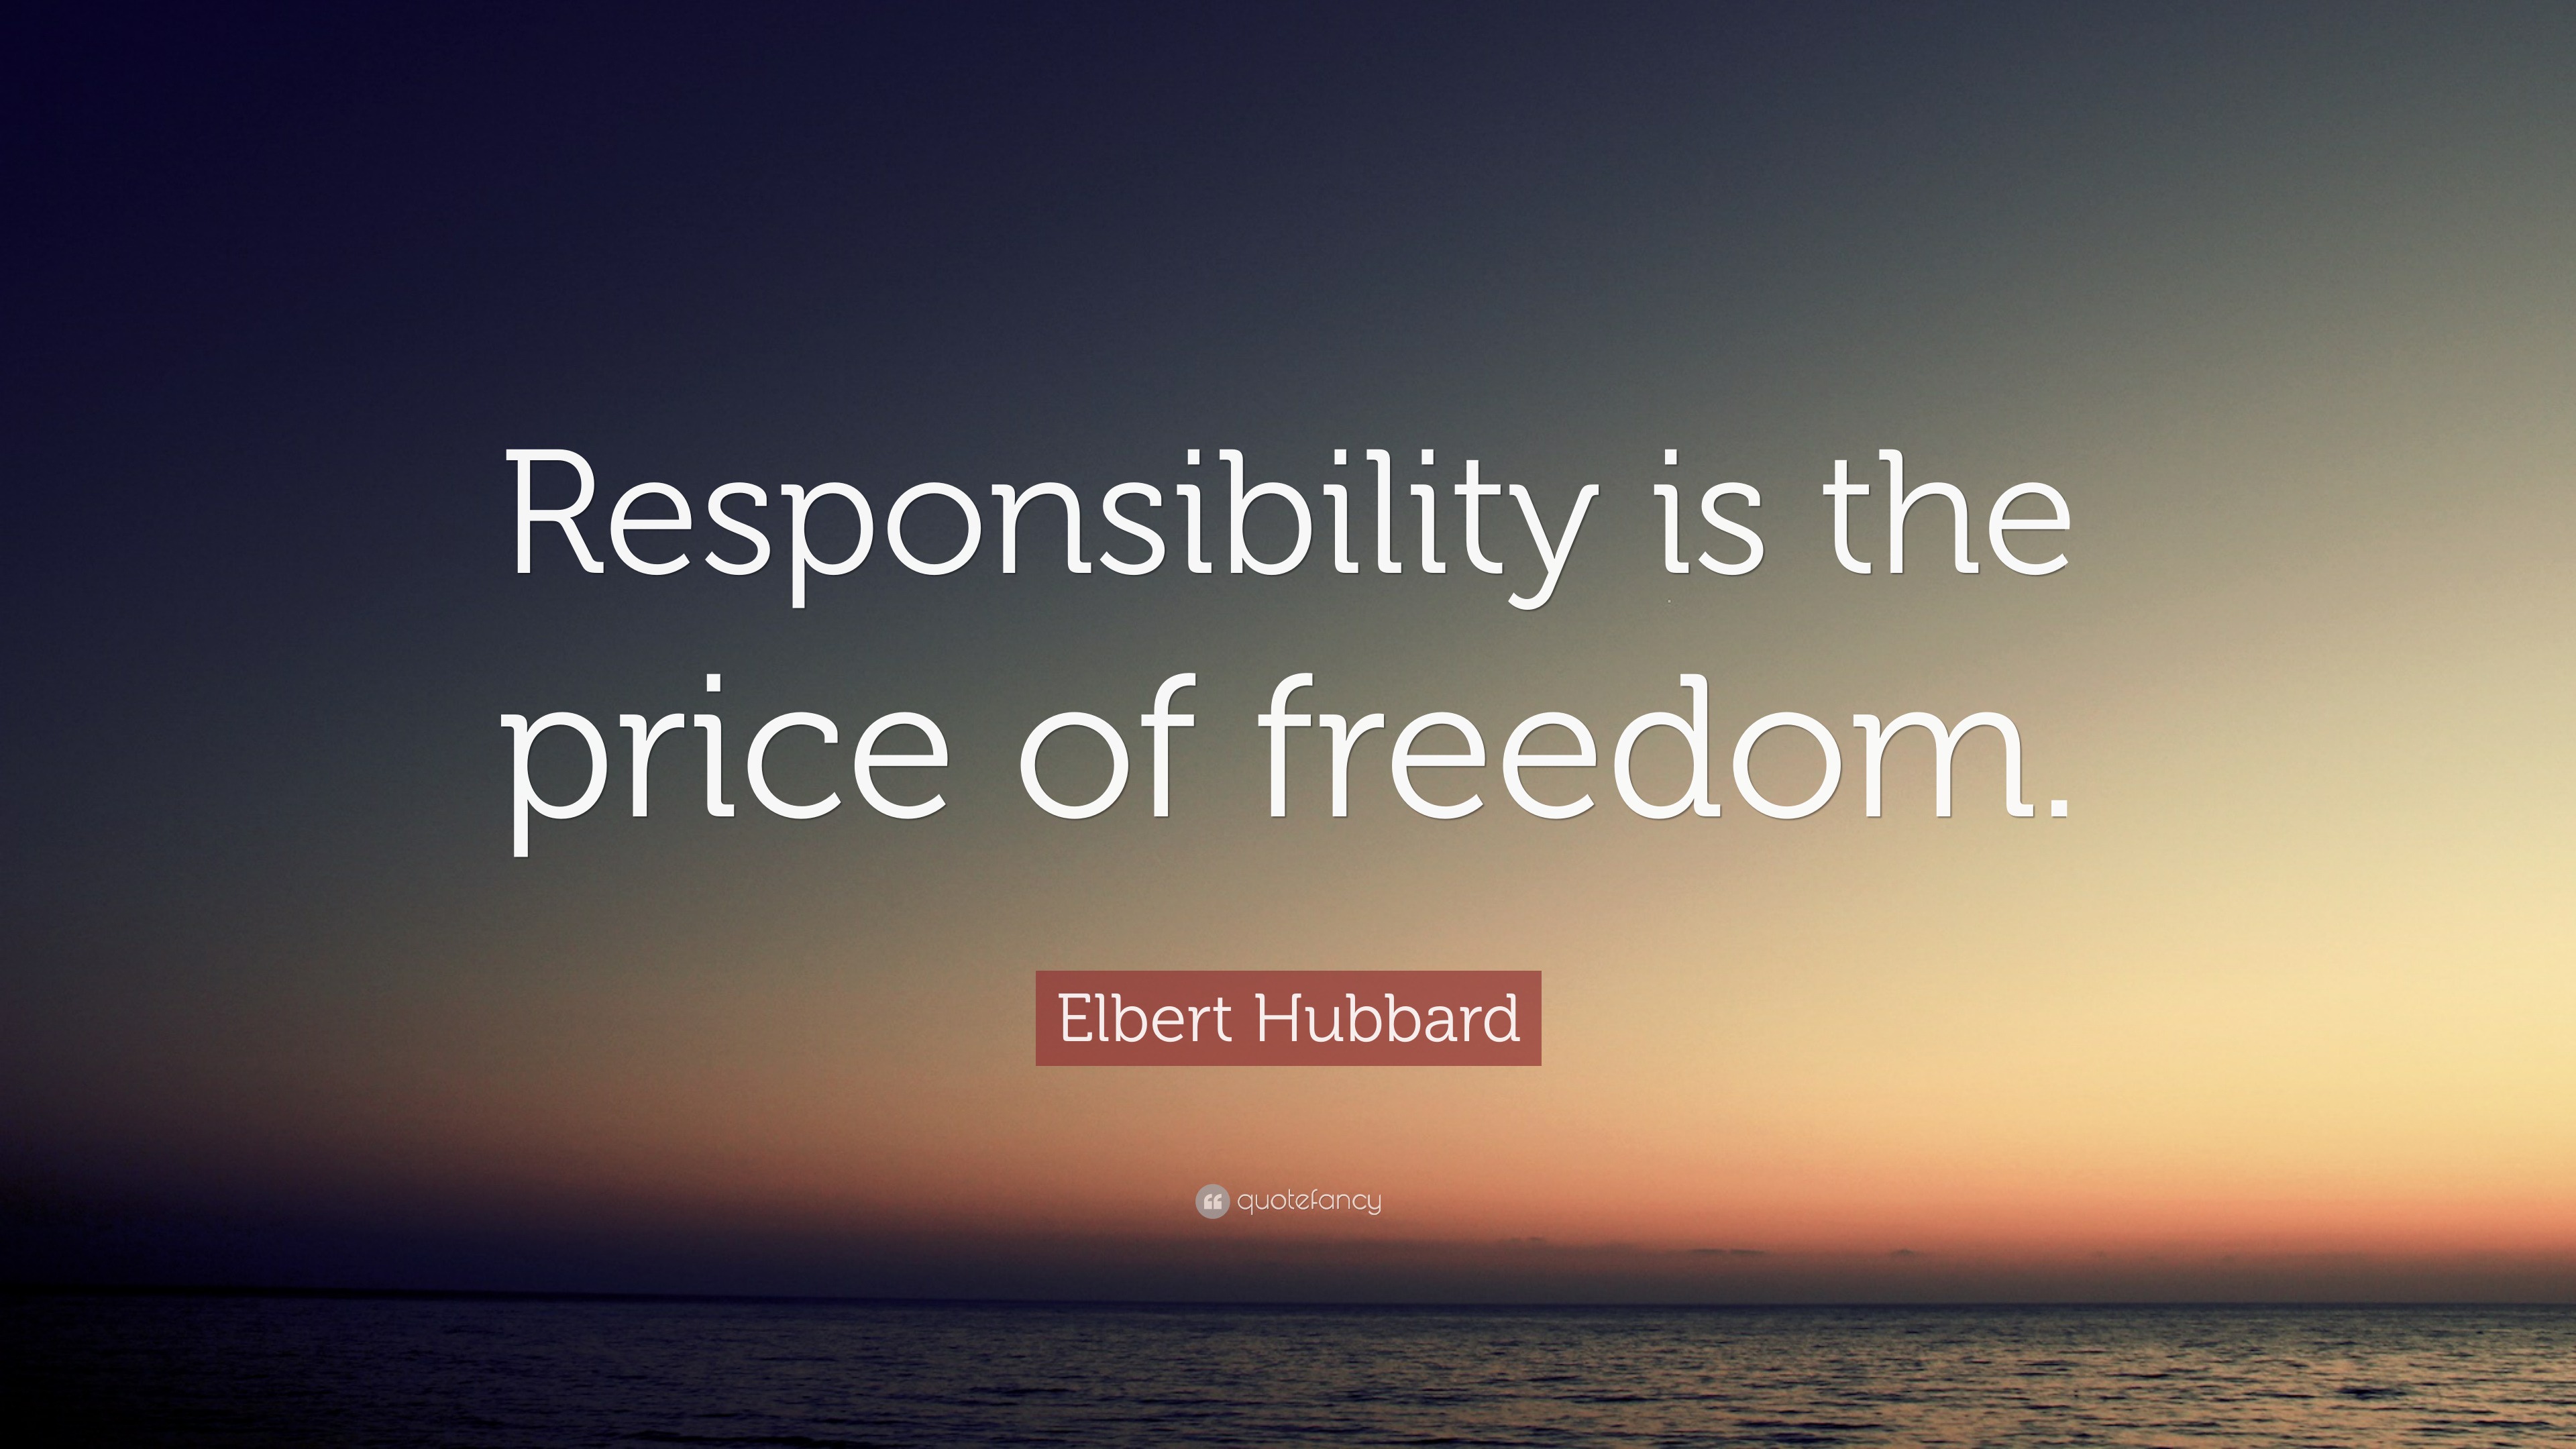 Elbert Hubbard Quote “Responsibility is the price of